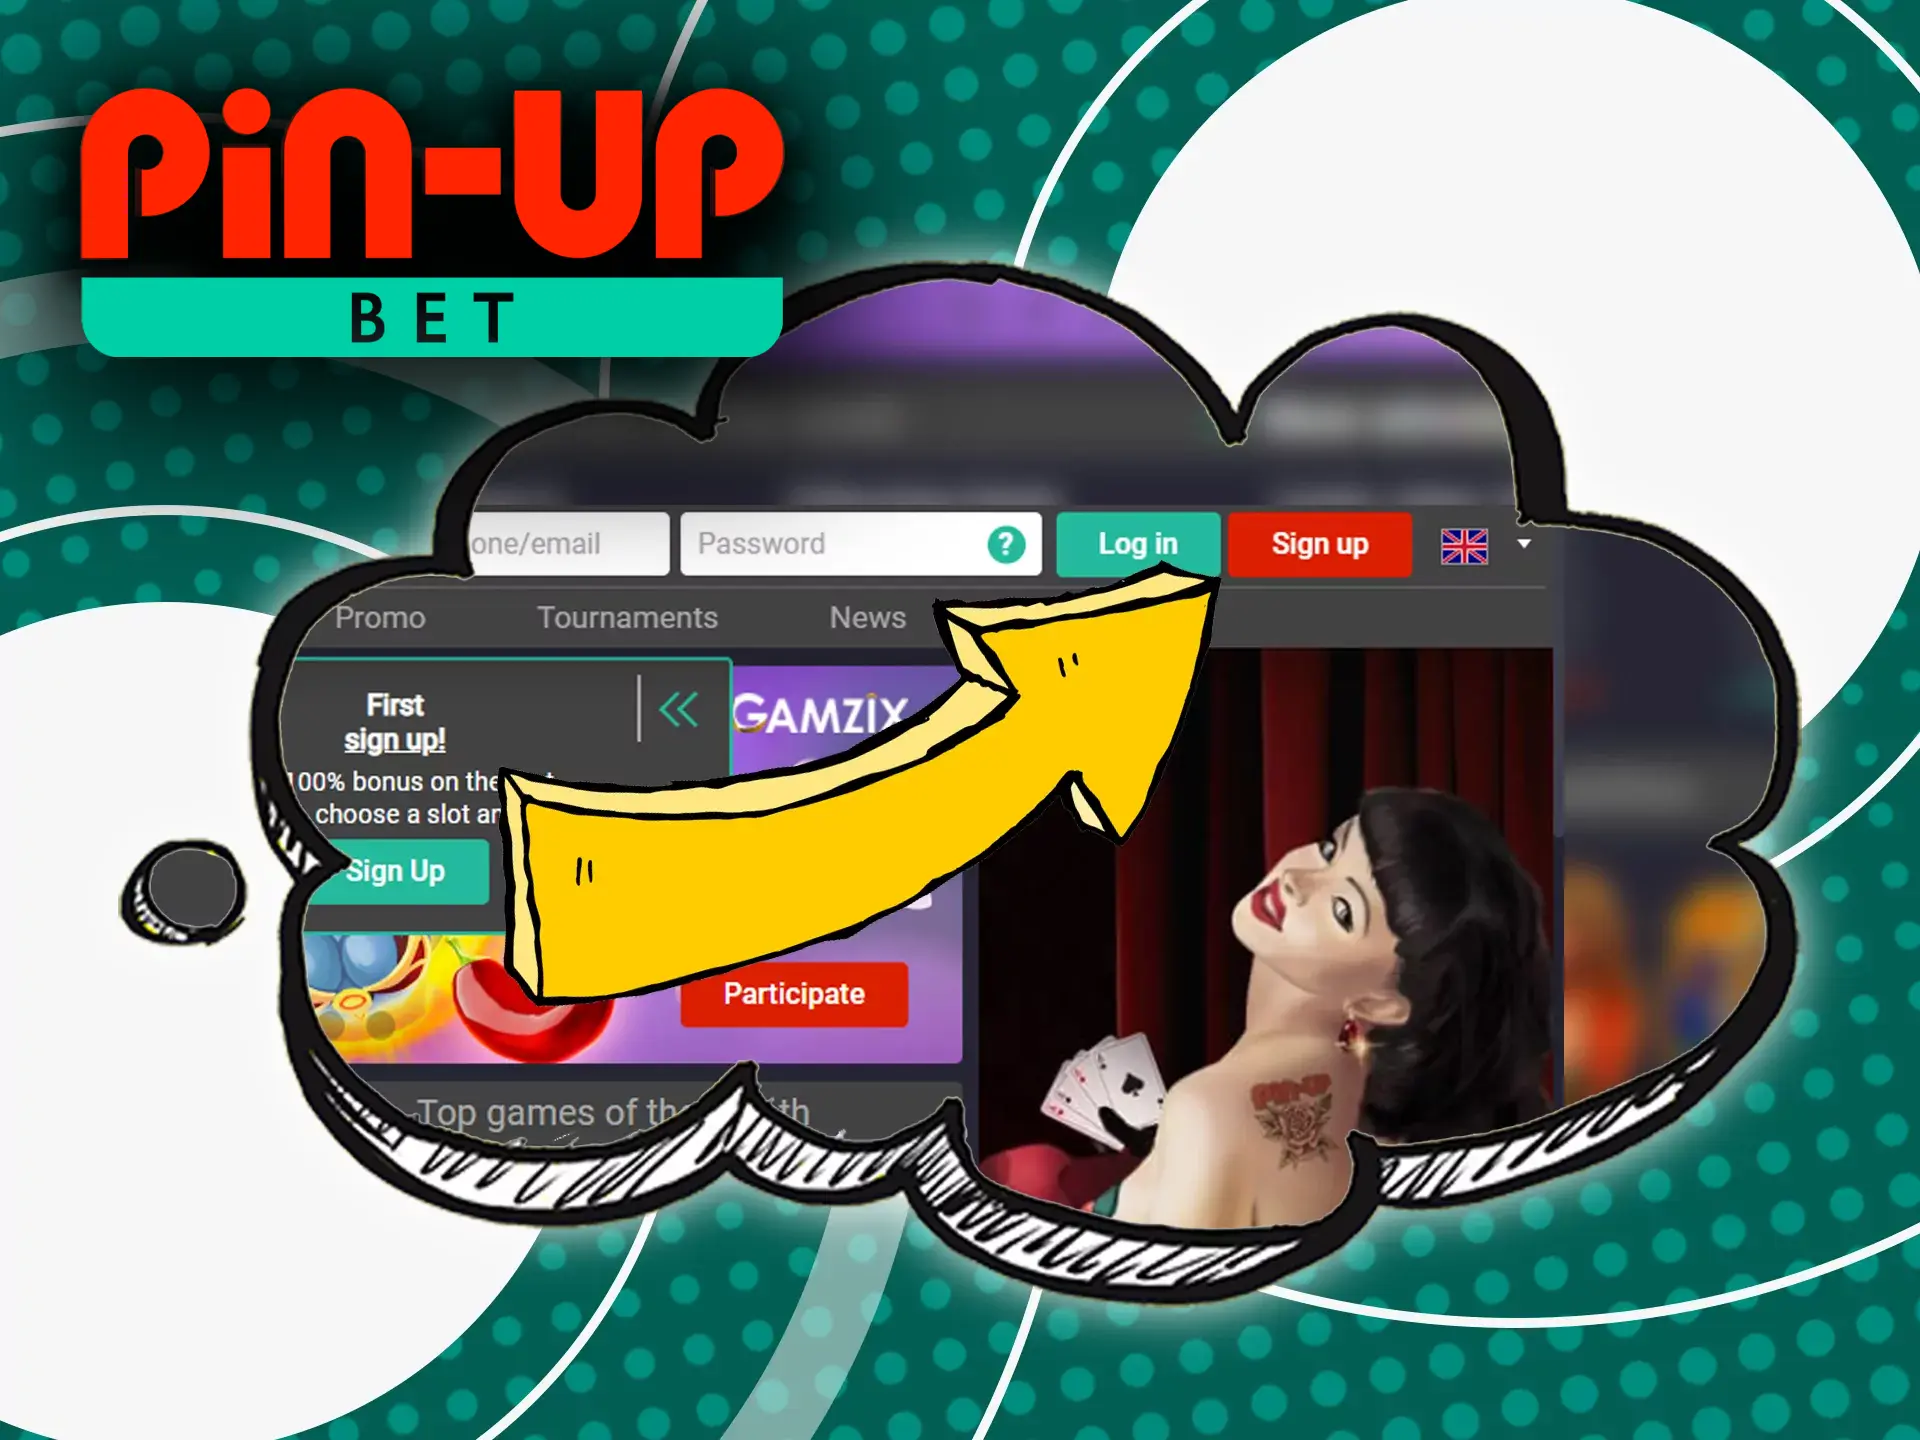 You can start betting at Pin Up after first deposit.